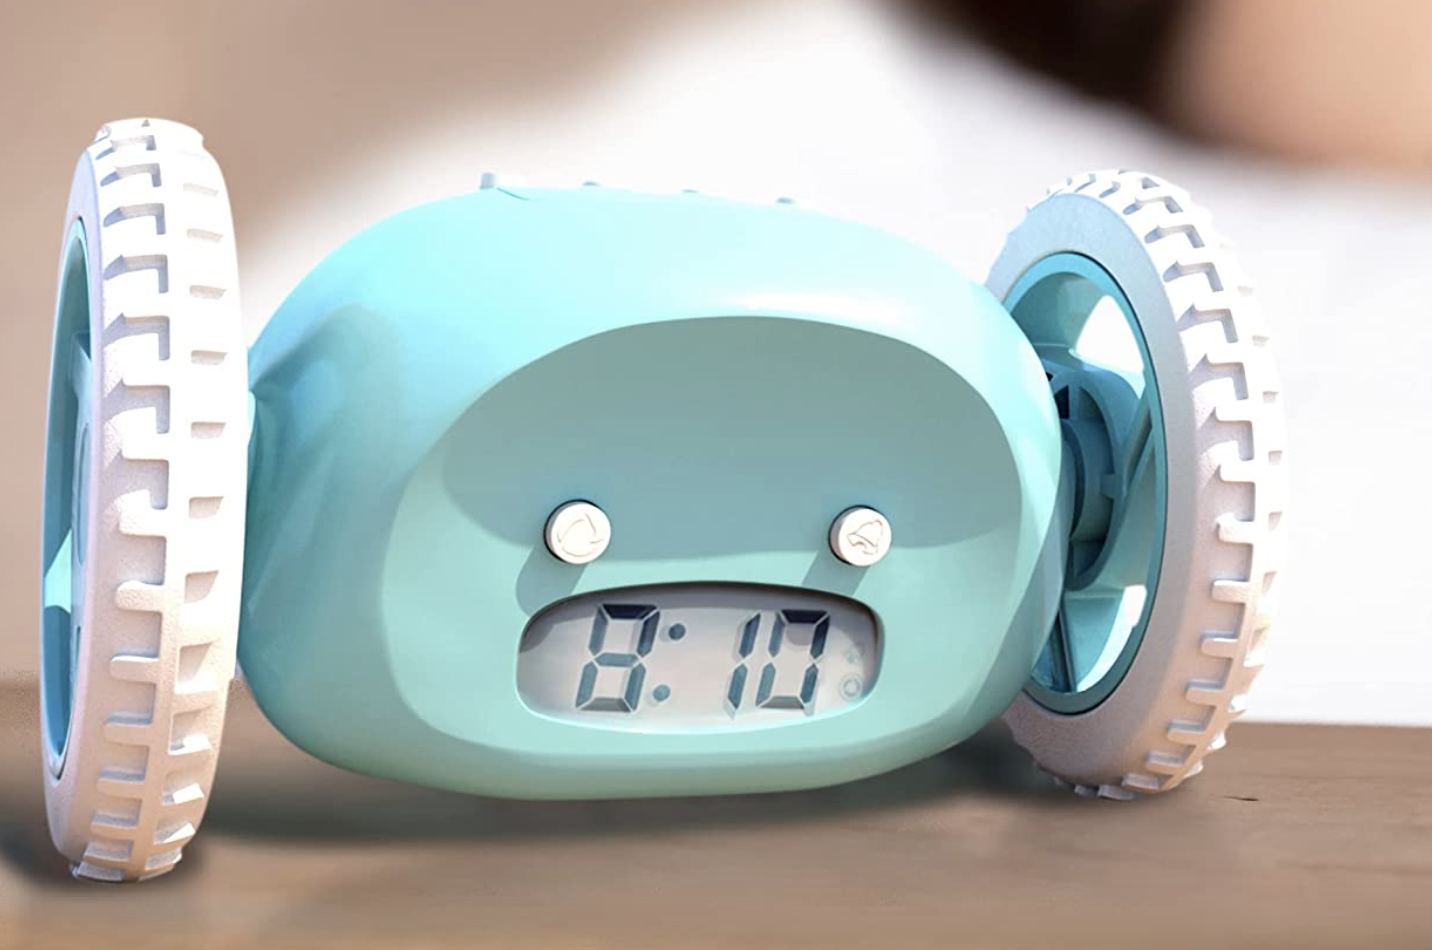 33 Seriously Cool Alarm Clocks You'll Actually Want To Wake Up To